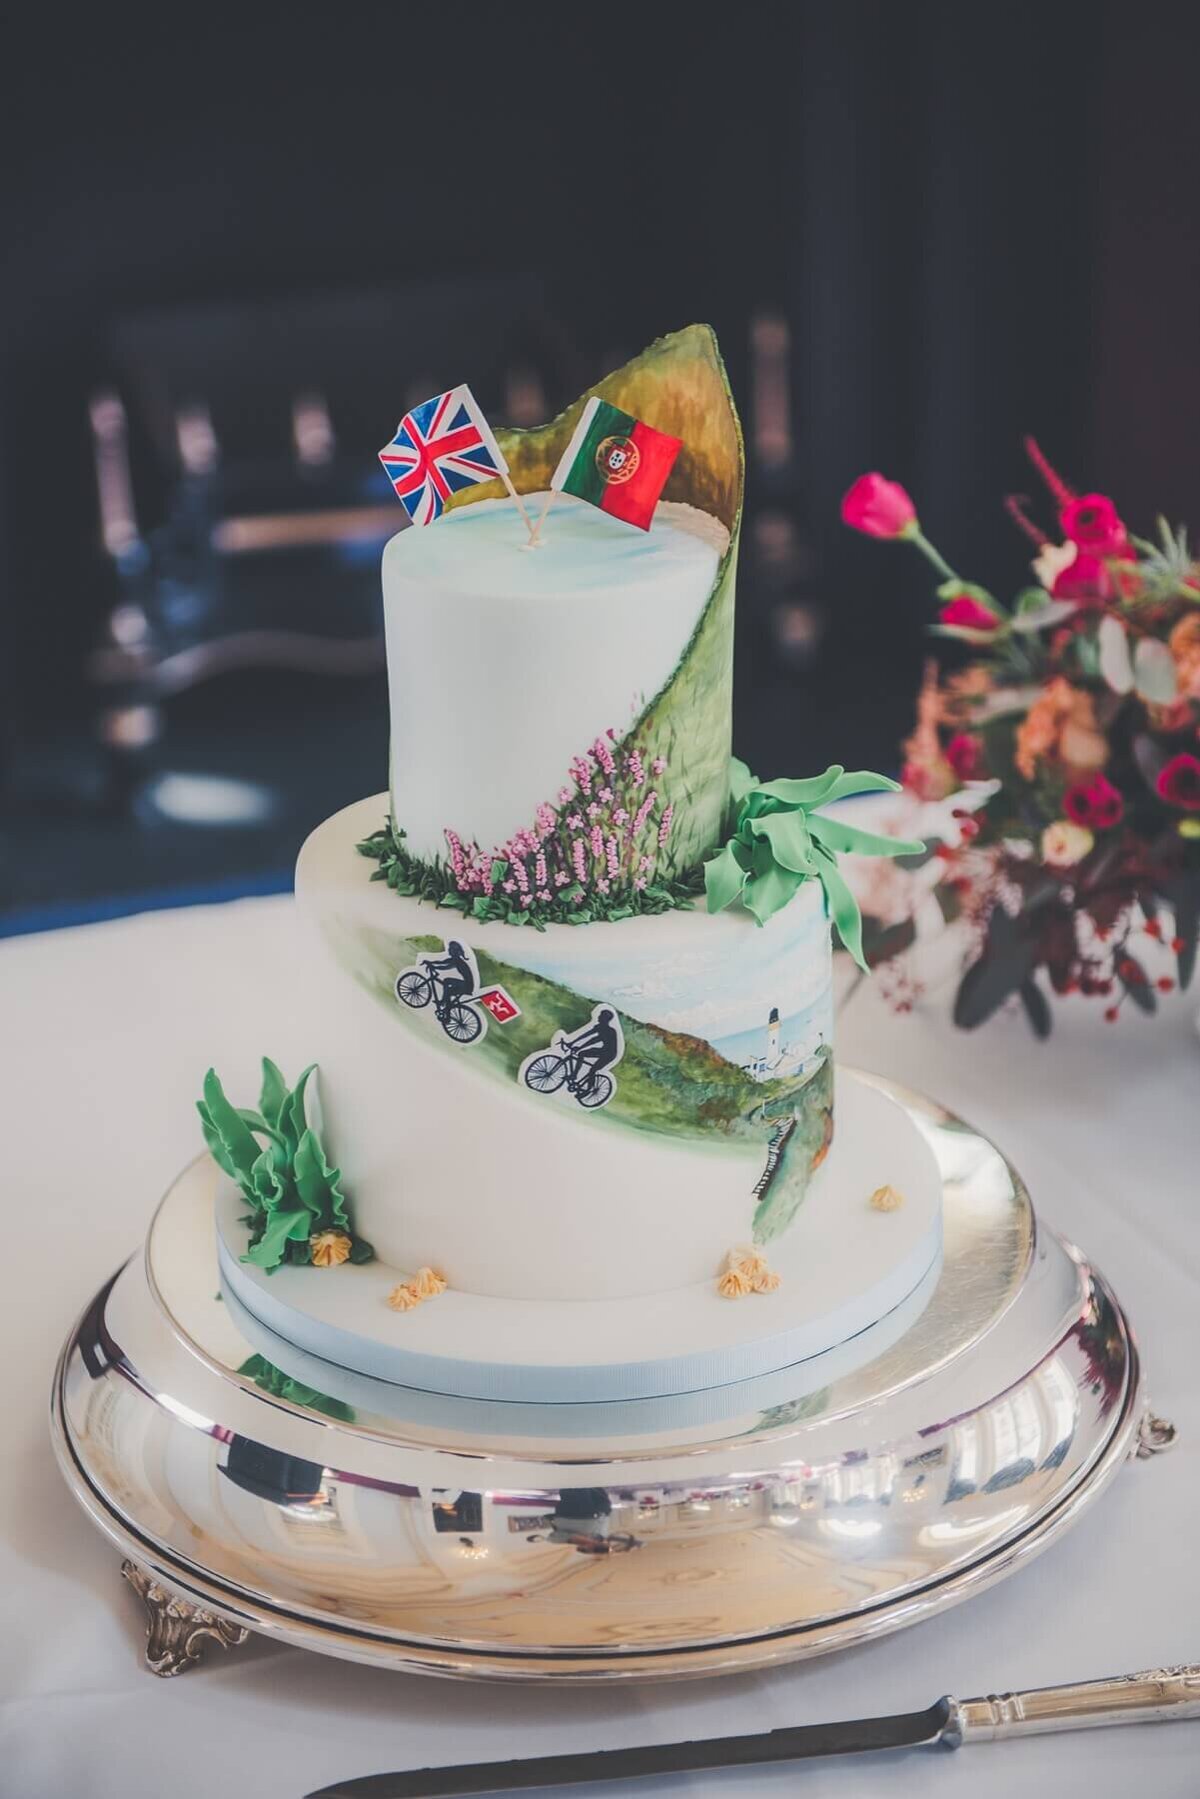 A unique hand painted wedding cake with 2 flags on the top to indicate the bride and grooms country of origin